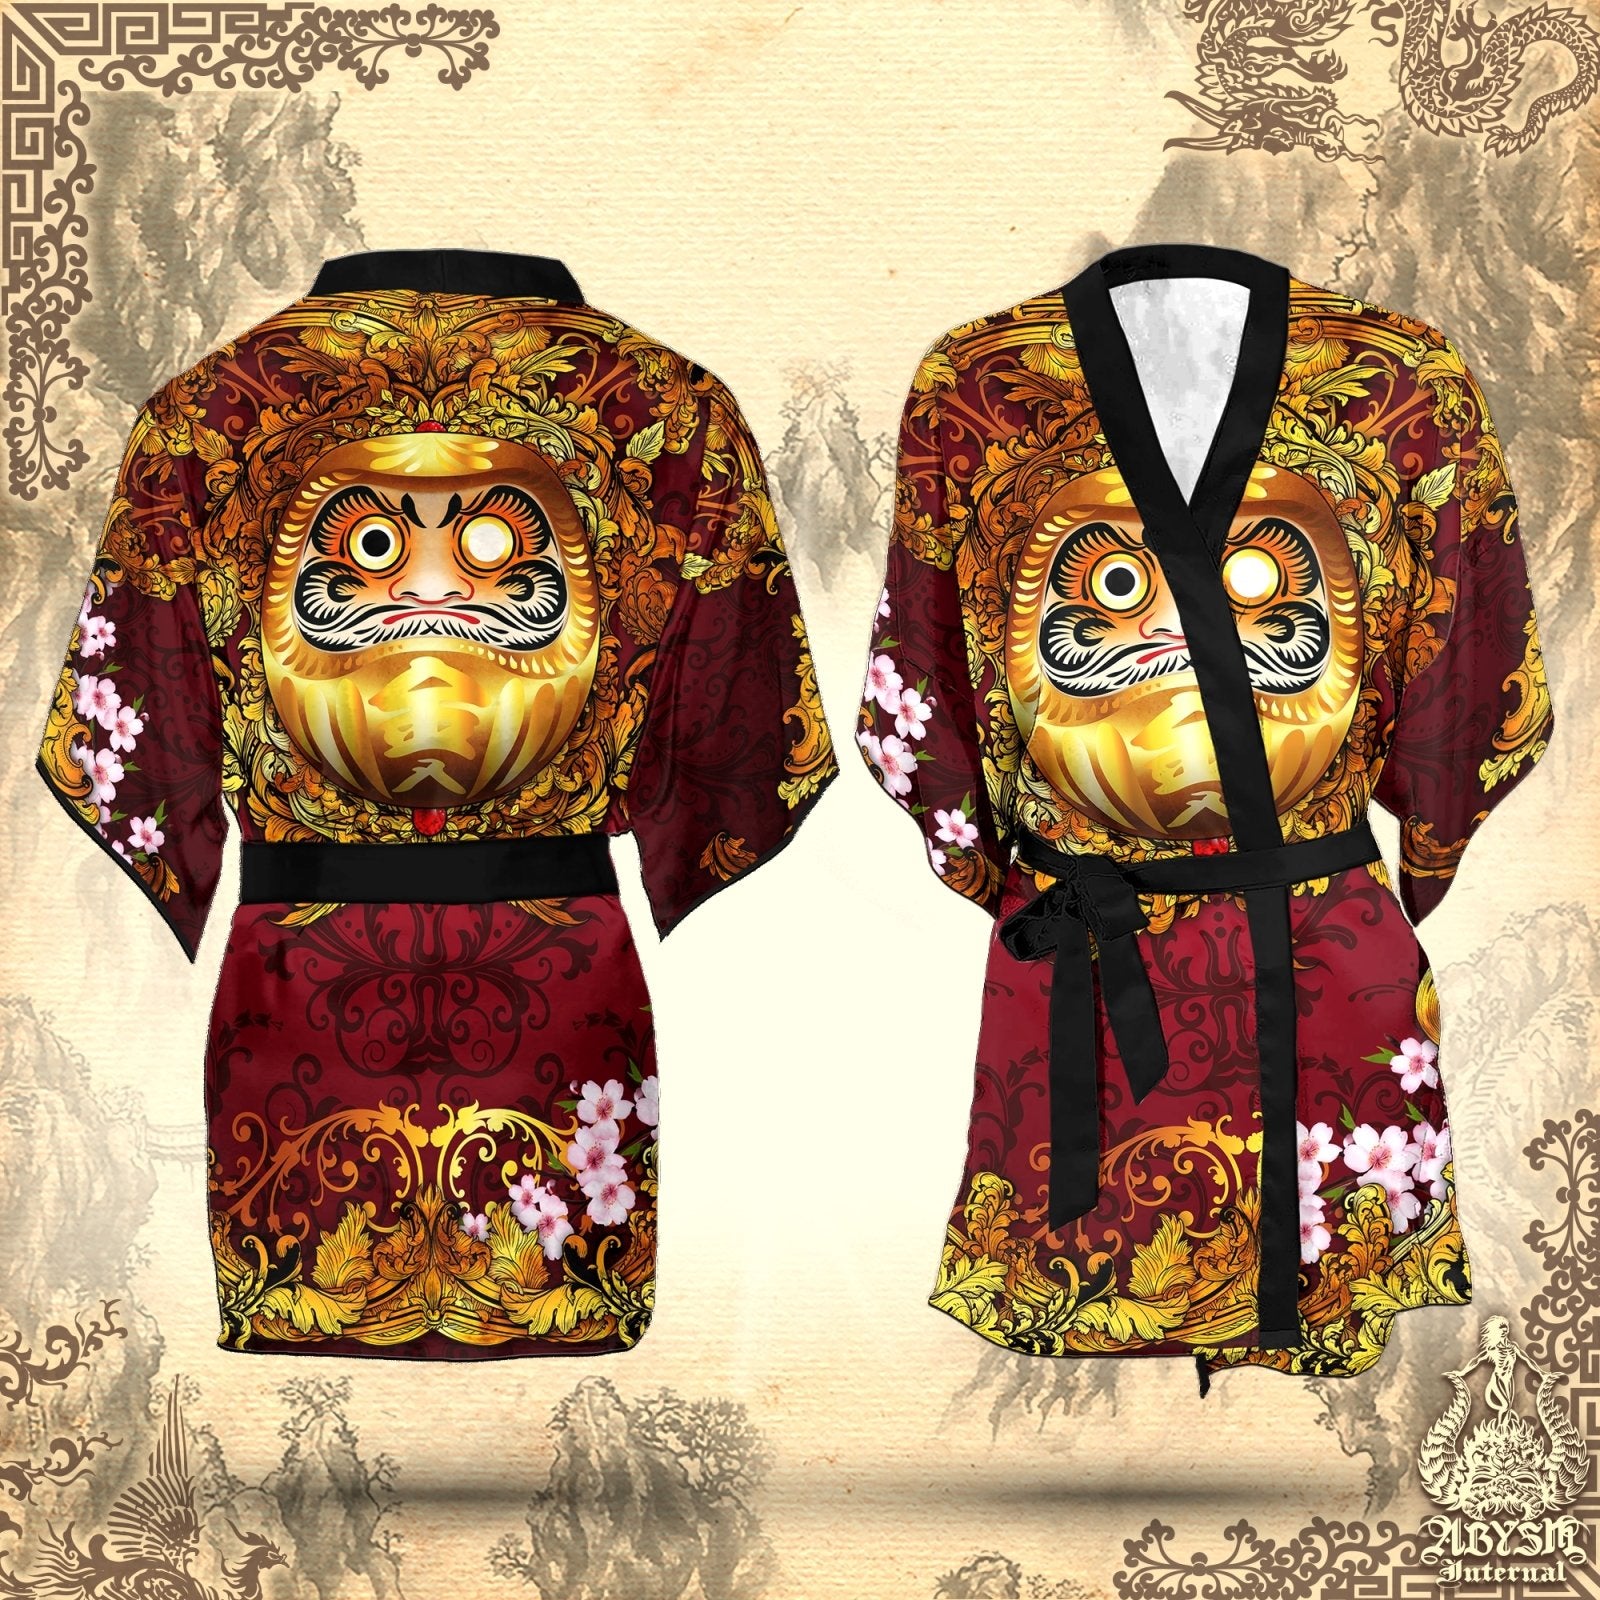 Daruma Cover Up, Beach Outfit, Party Kimono, Japanese Summer Festival Robe, Indie and Alternative Clothing, Unisex - Gold - Abysm Internal